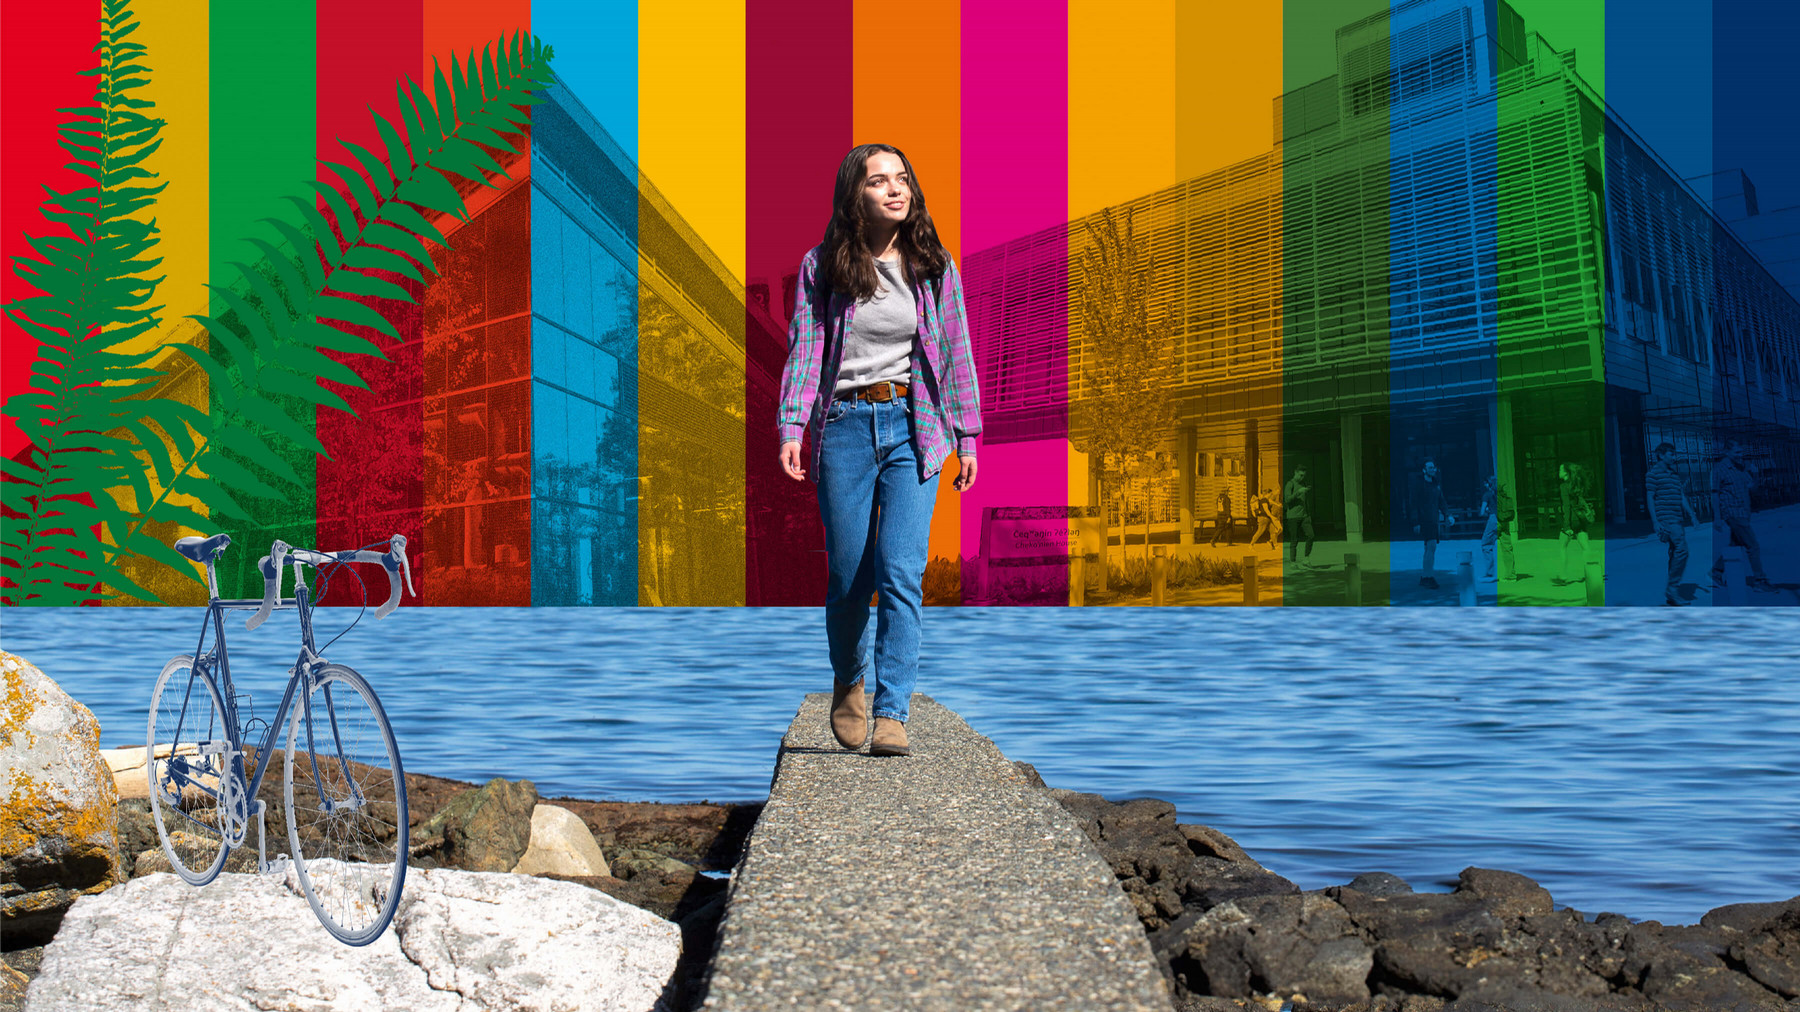 A colour composite with bright coloured stripes, a body of water, a young woman, rocks, tree and a bicycle